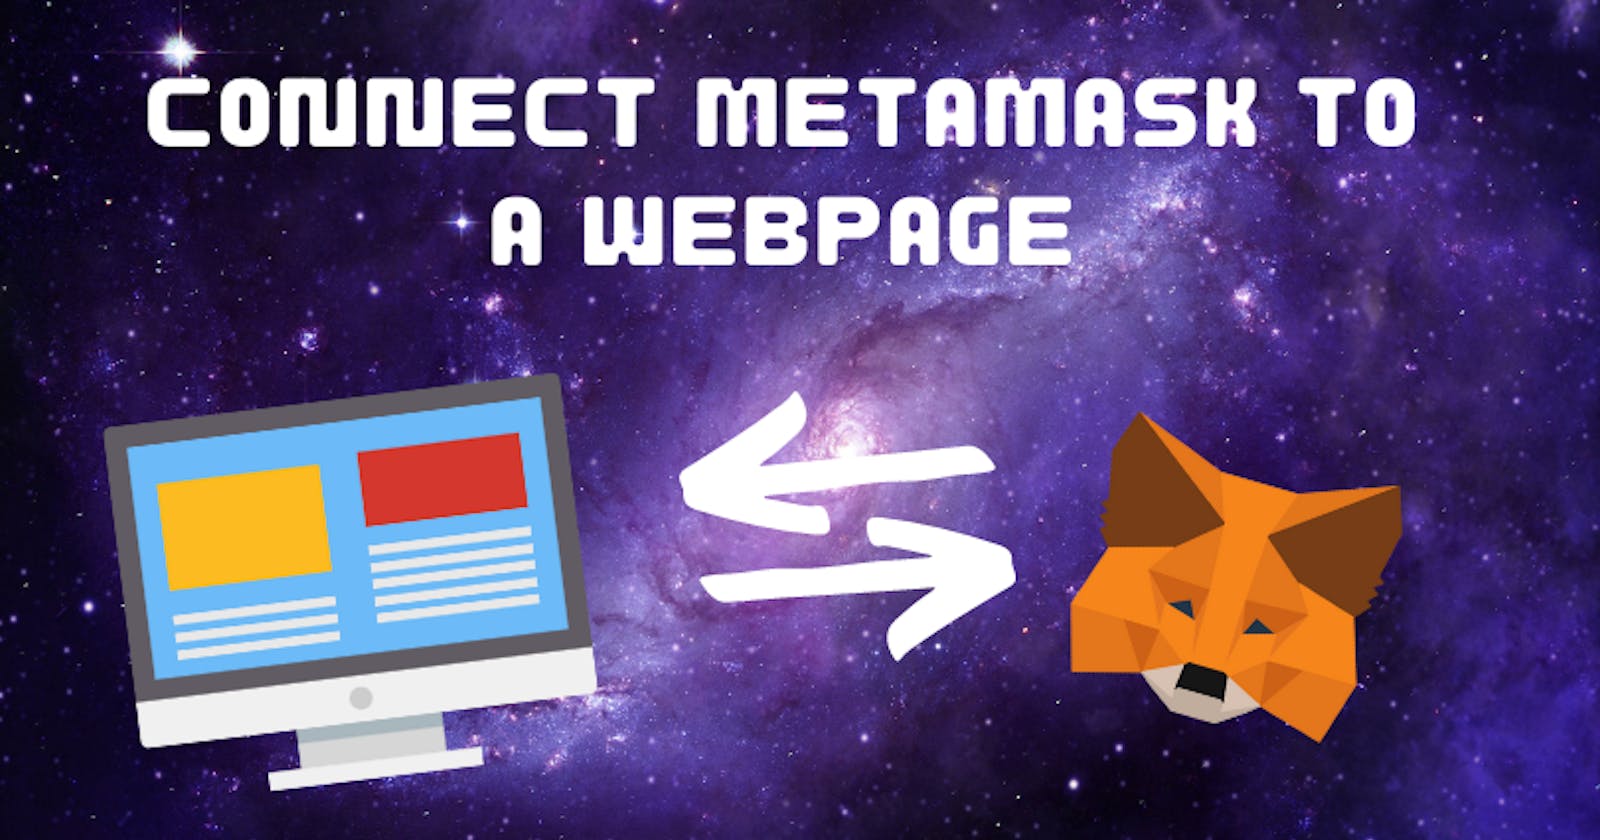 How to connect MetaMask to a webpage